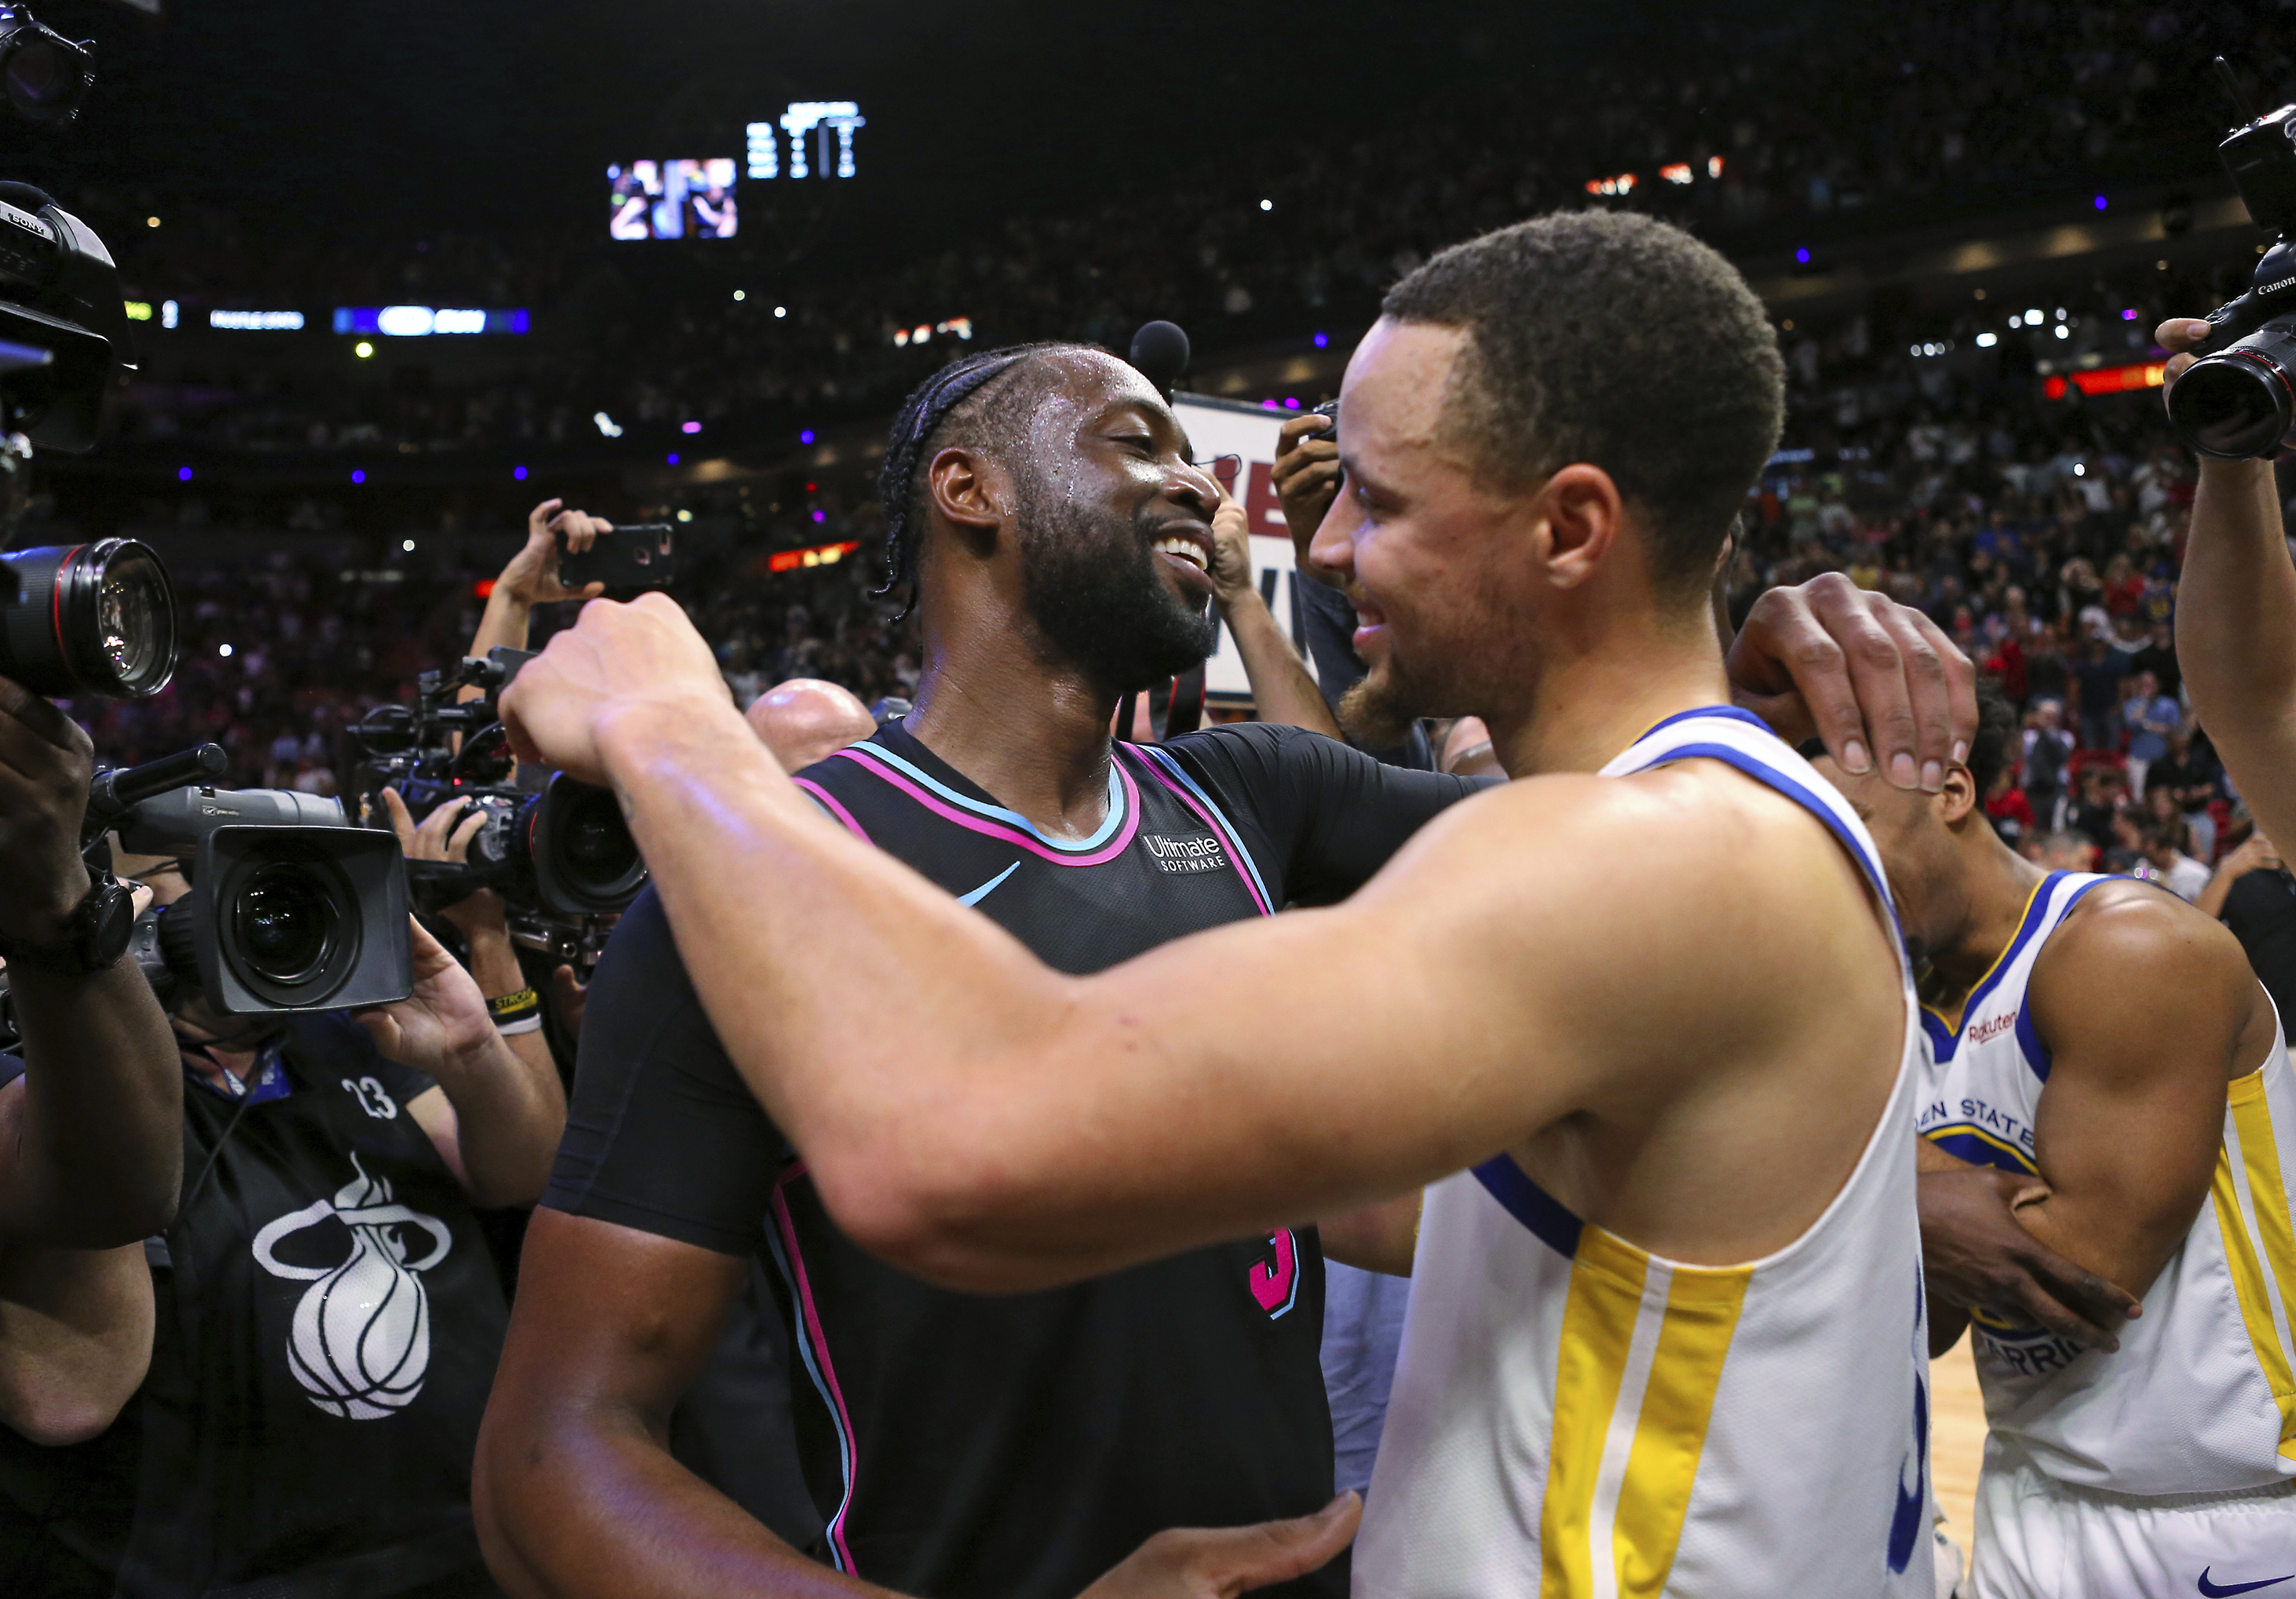 After game-winning shot, Wade's thoughts turn to Kobe